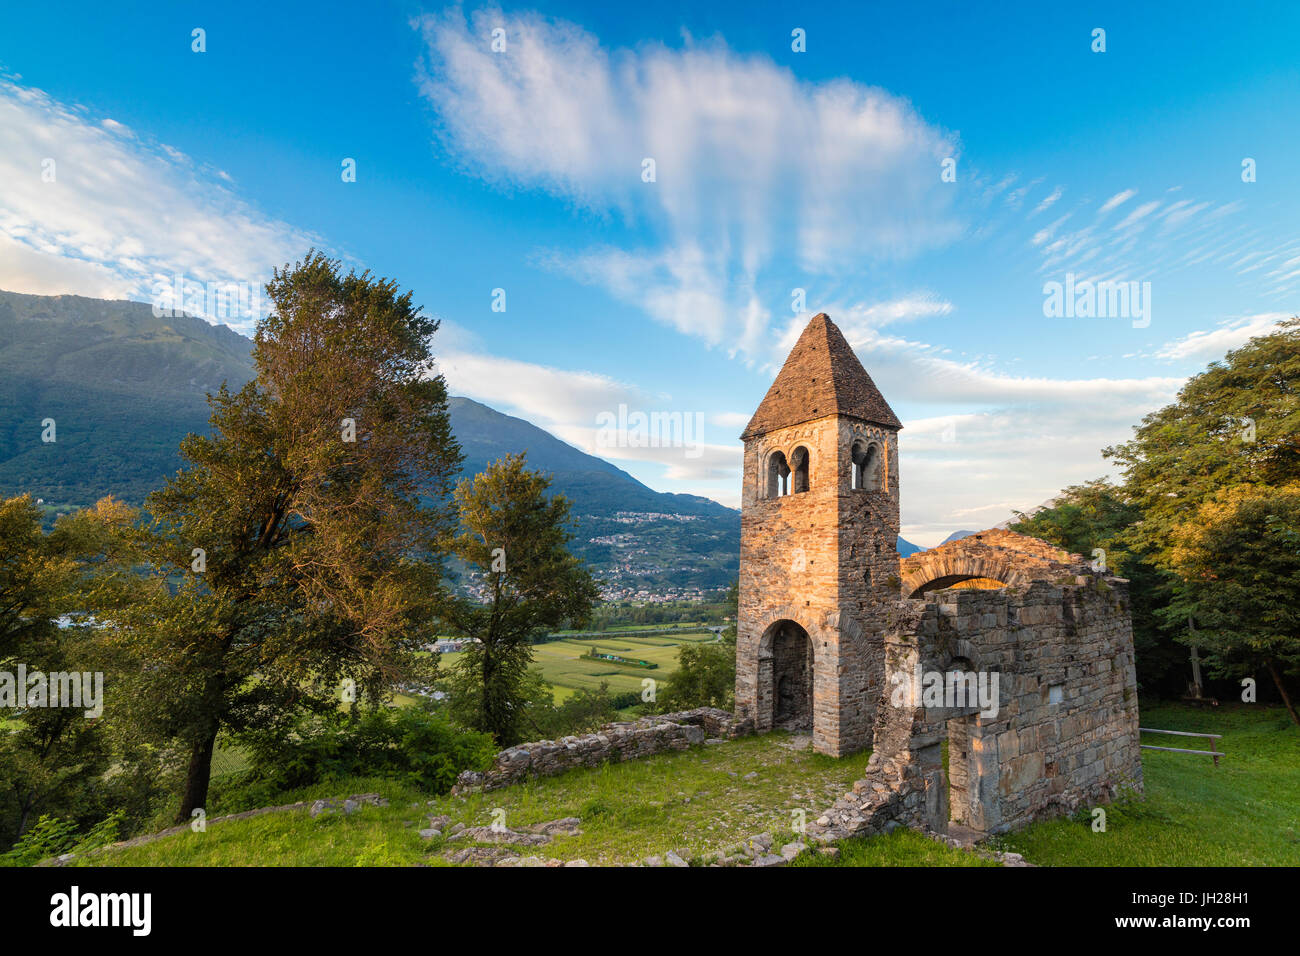 Sunset sky frames the ancient Abbey of San Pietro in Vallate, Piagno, Sondrio province, Lower Valtellina, Lombardy, Italy Stock Photo